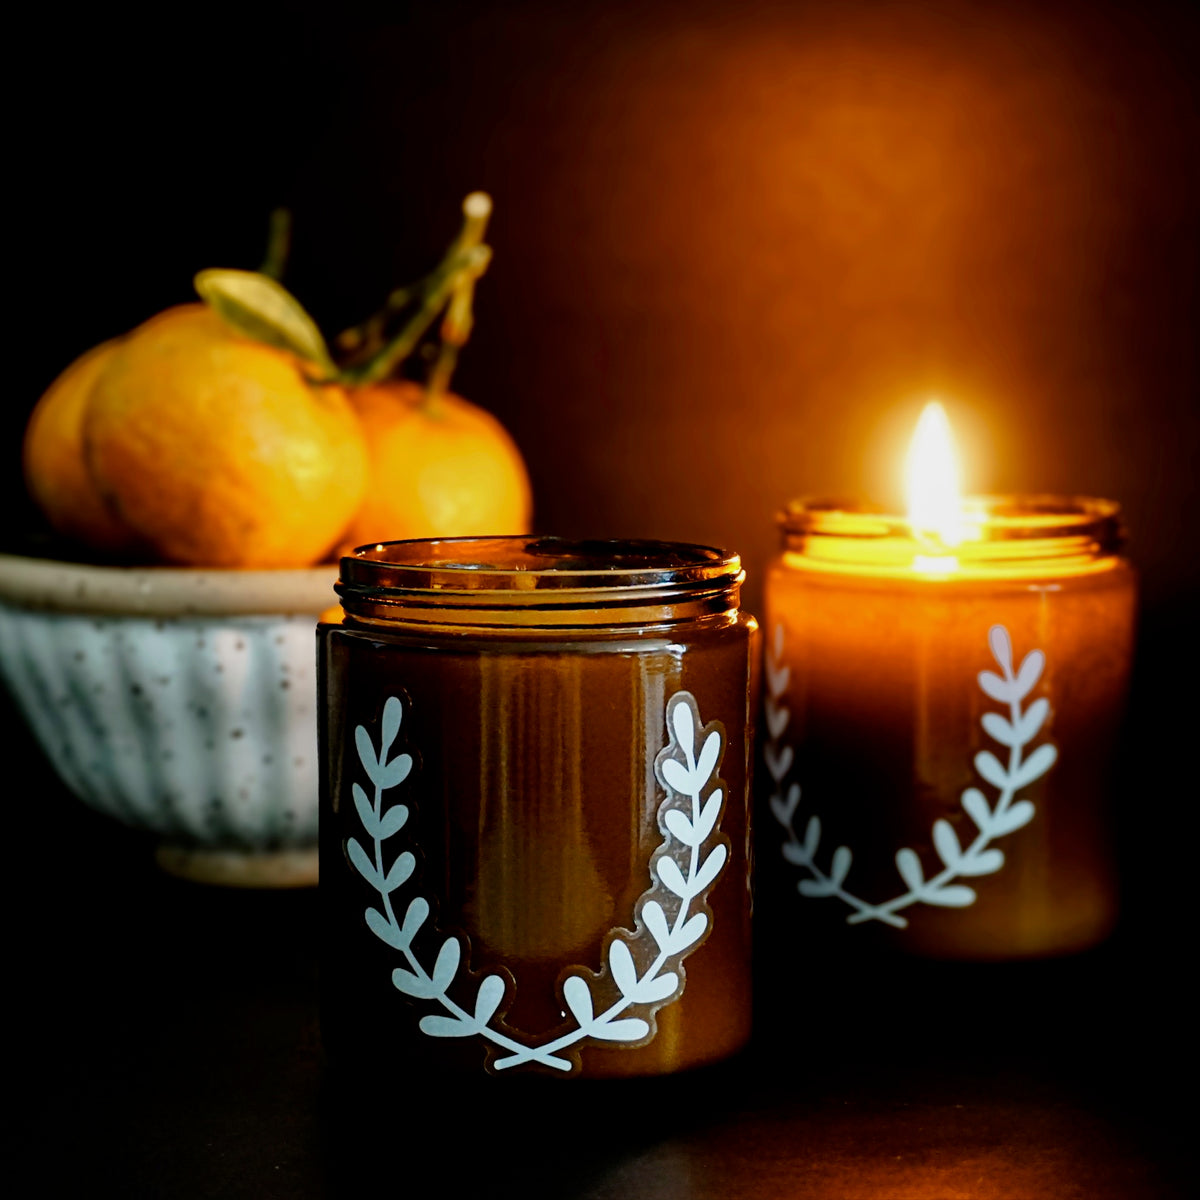 Citrus Tree soy candle, bowl of tangerines, Blackett & Co. soy candles handmade in Halifax, Nova Scotia